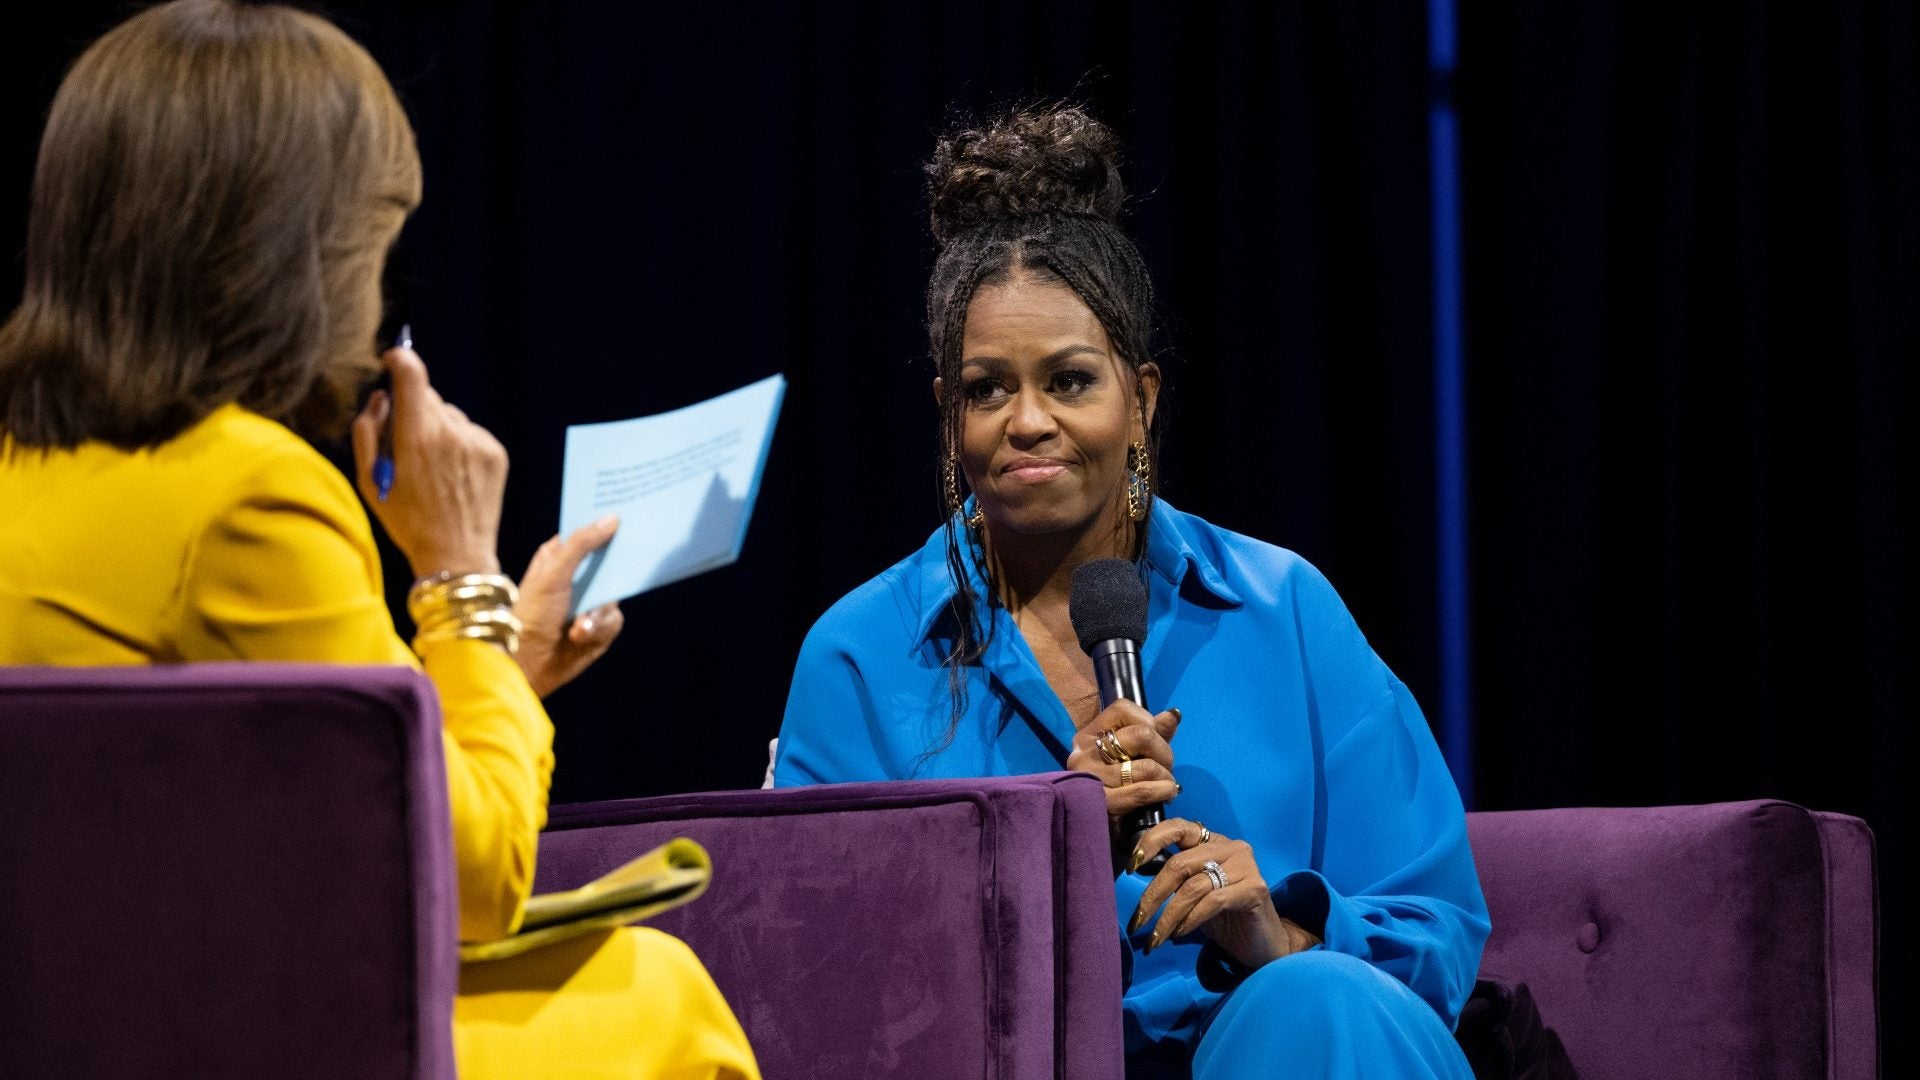 EXCLUSIVE- Michelle Obama Recalls Racist Double Standard If Daughters Were "Messy" While She Was First Lady: "It Wouldn't Have Been Laughed Off"